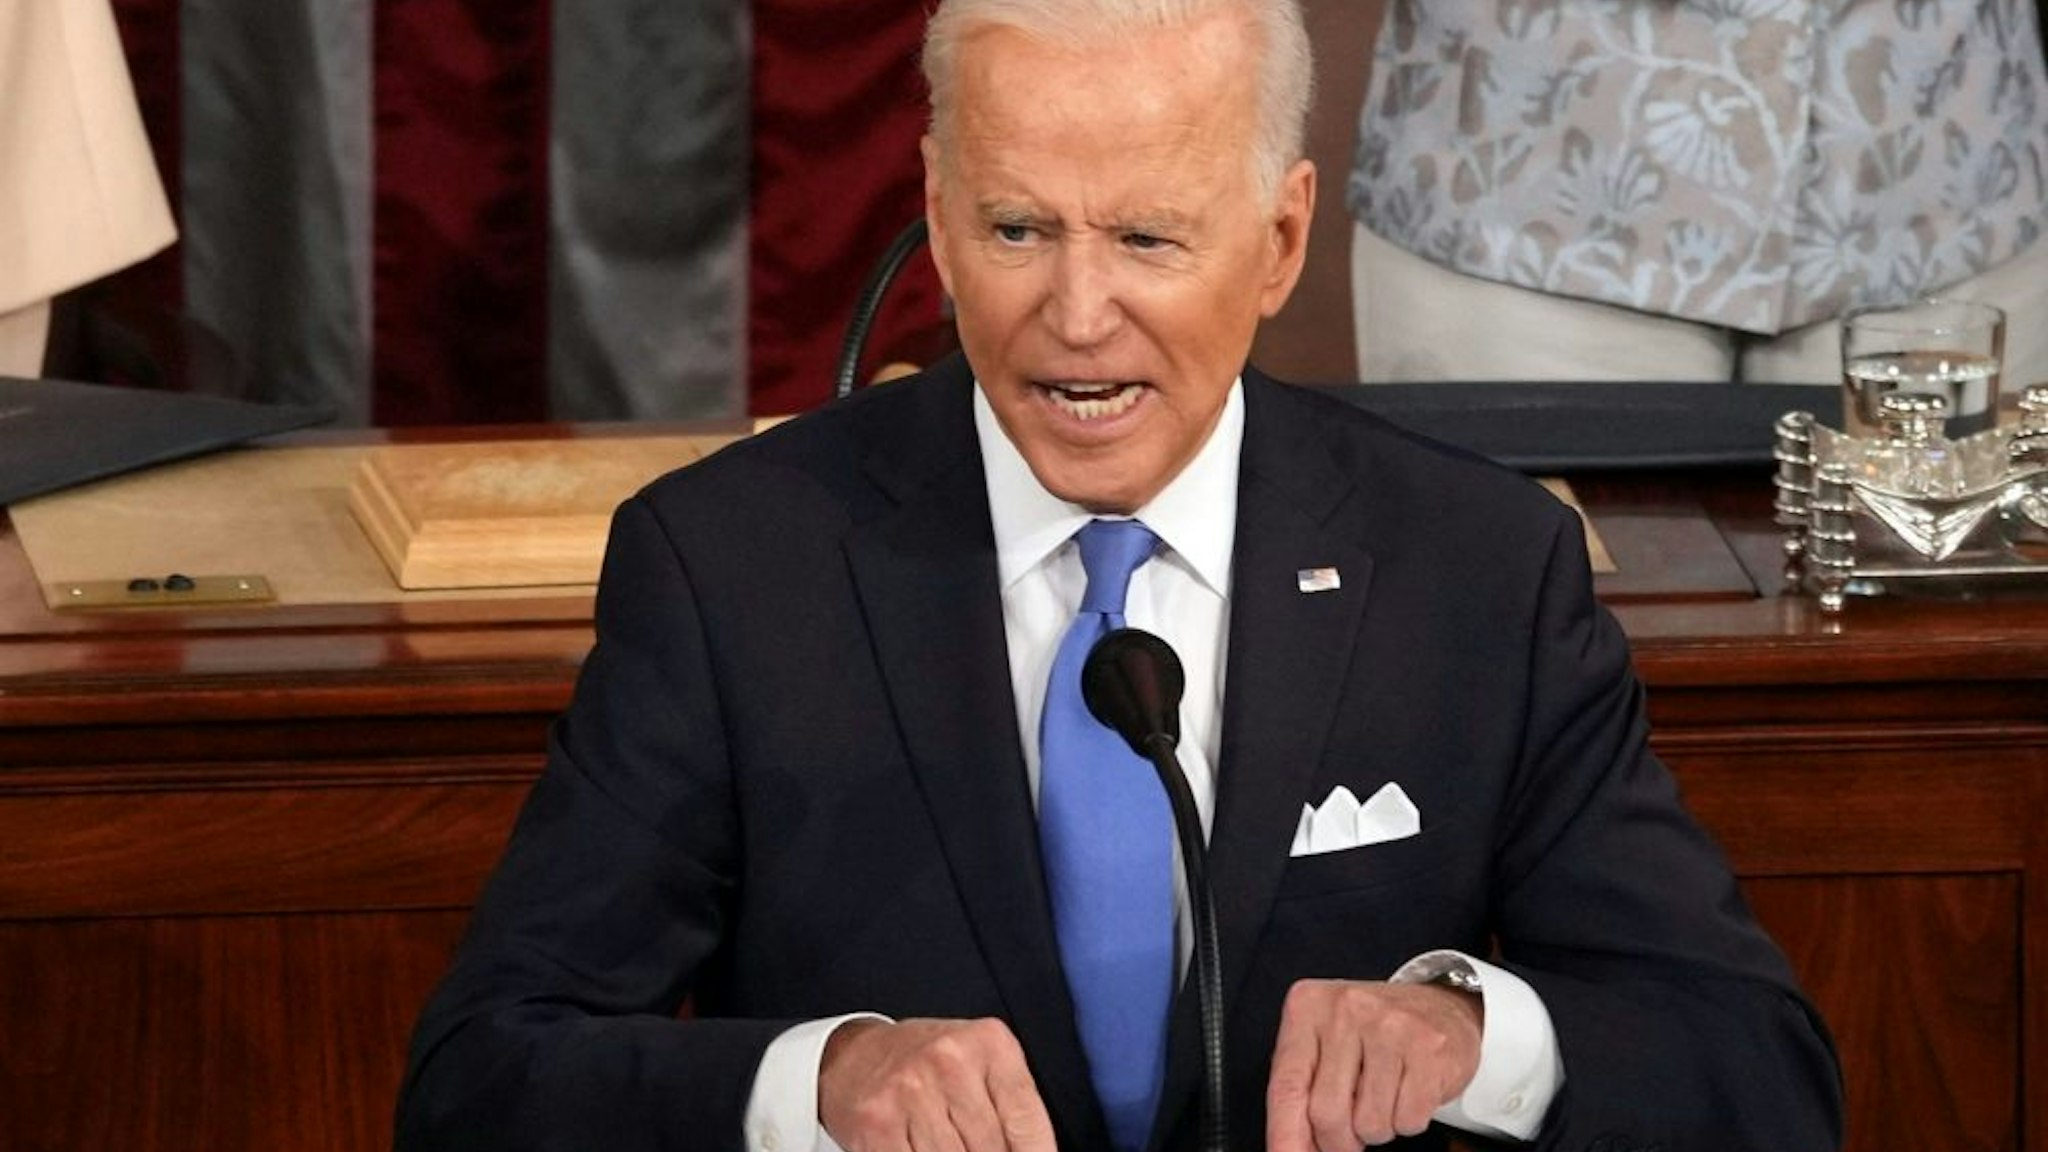 US President Joe Biden addresses a joint session of Congress at the US Capitol in Washington, DC, on April 28, 2021.